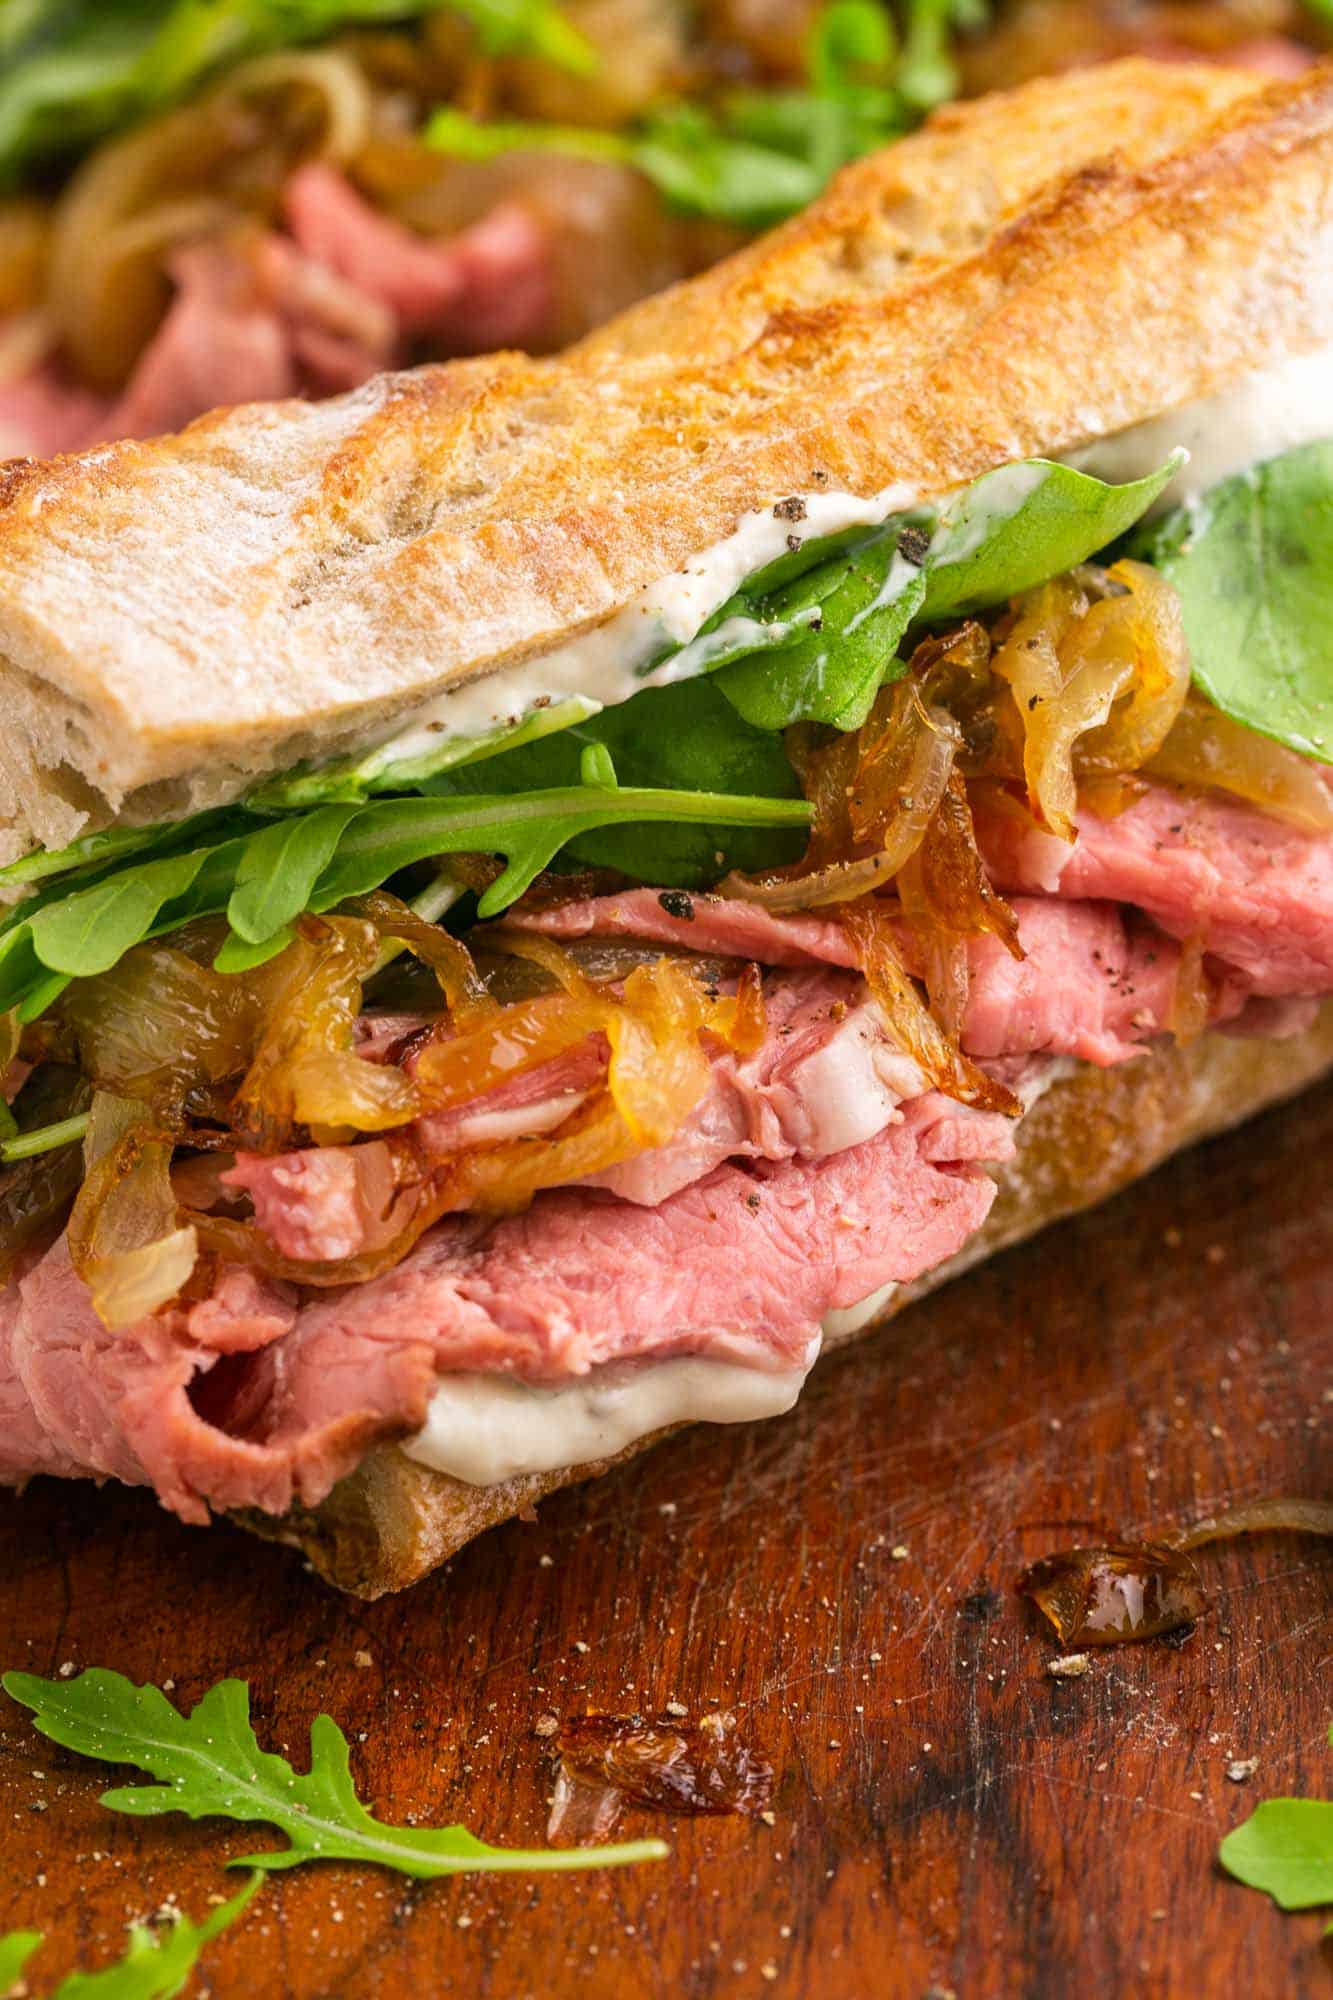 closeup view of a prime rib sandwich with rare beef, creamy horseradish sauce, caramelized onions, baby arugula, all layered on a split baguette.